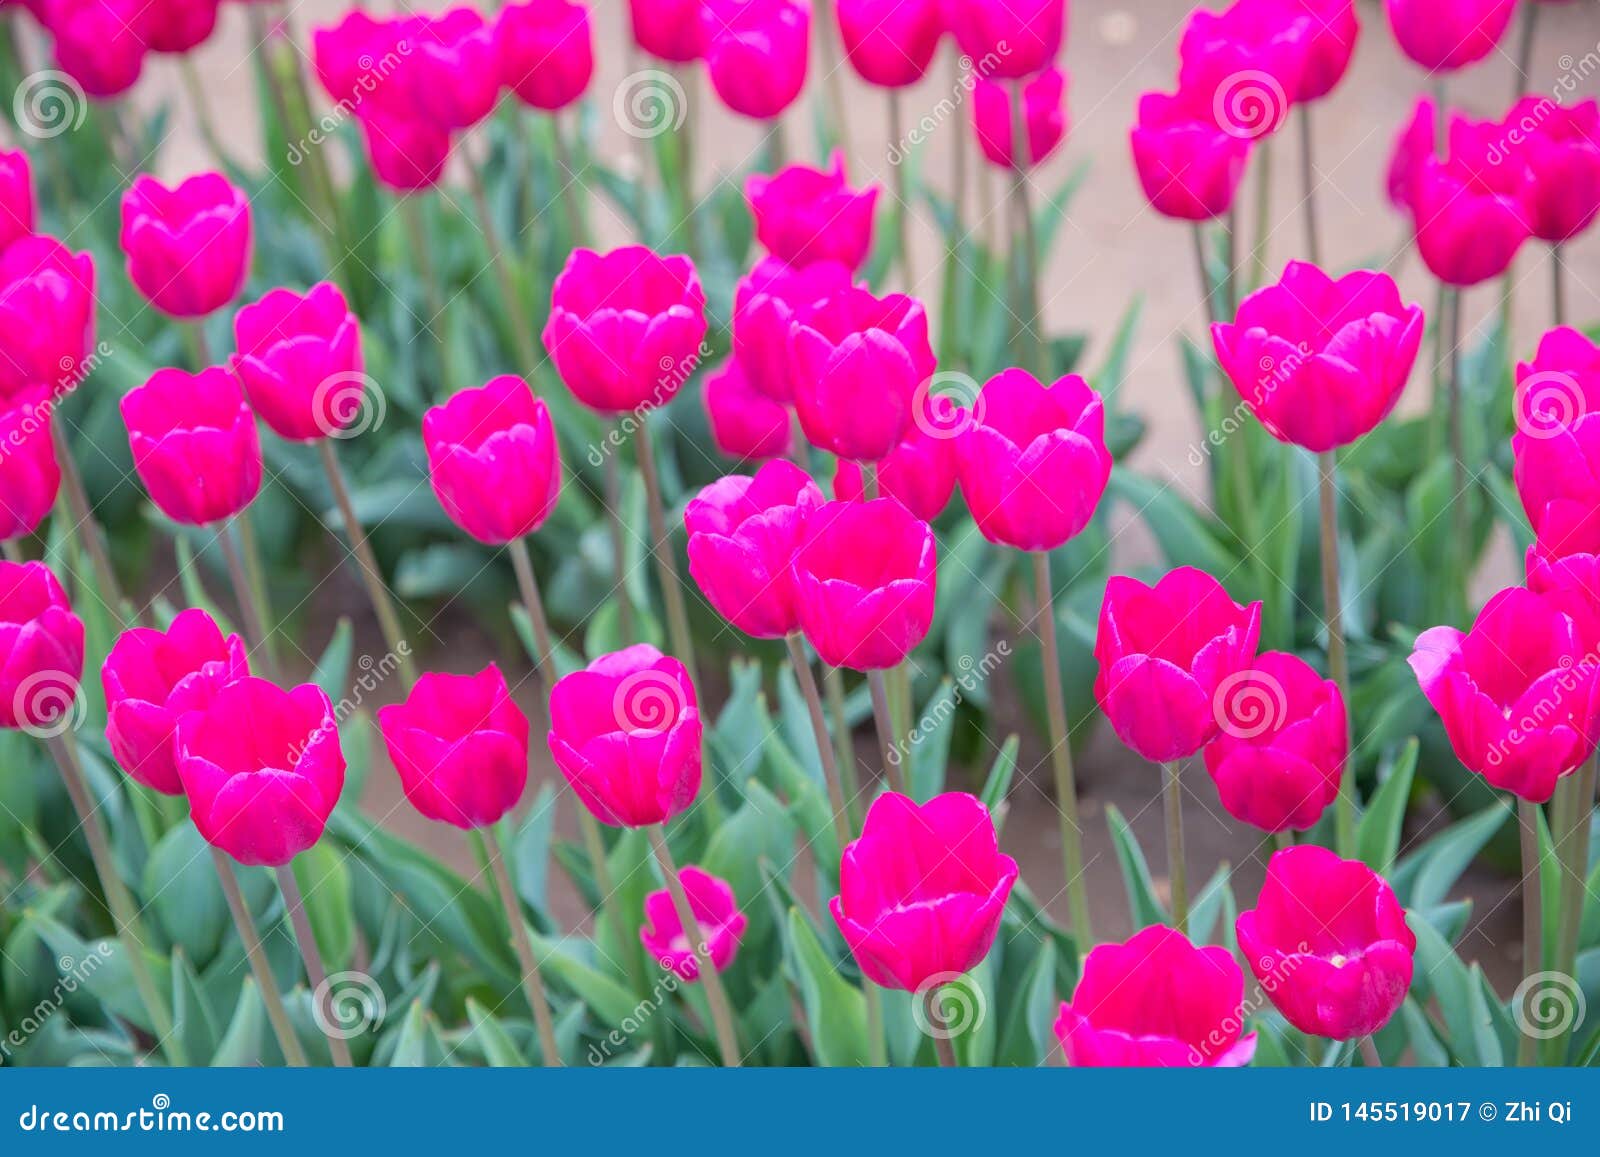 flower beds with colorful tulips in the tulip festival new jersey